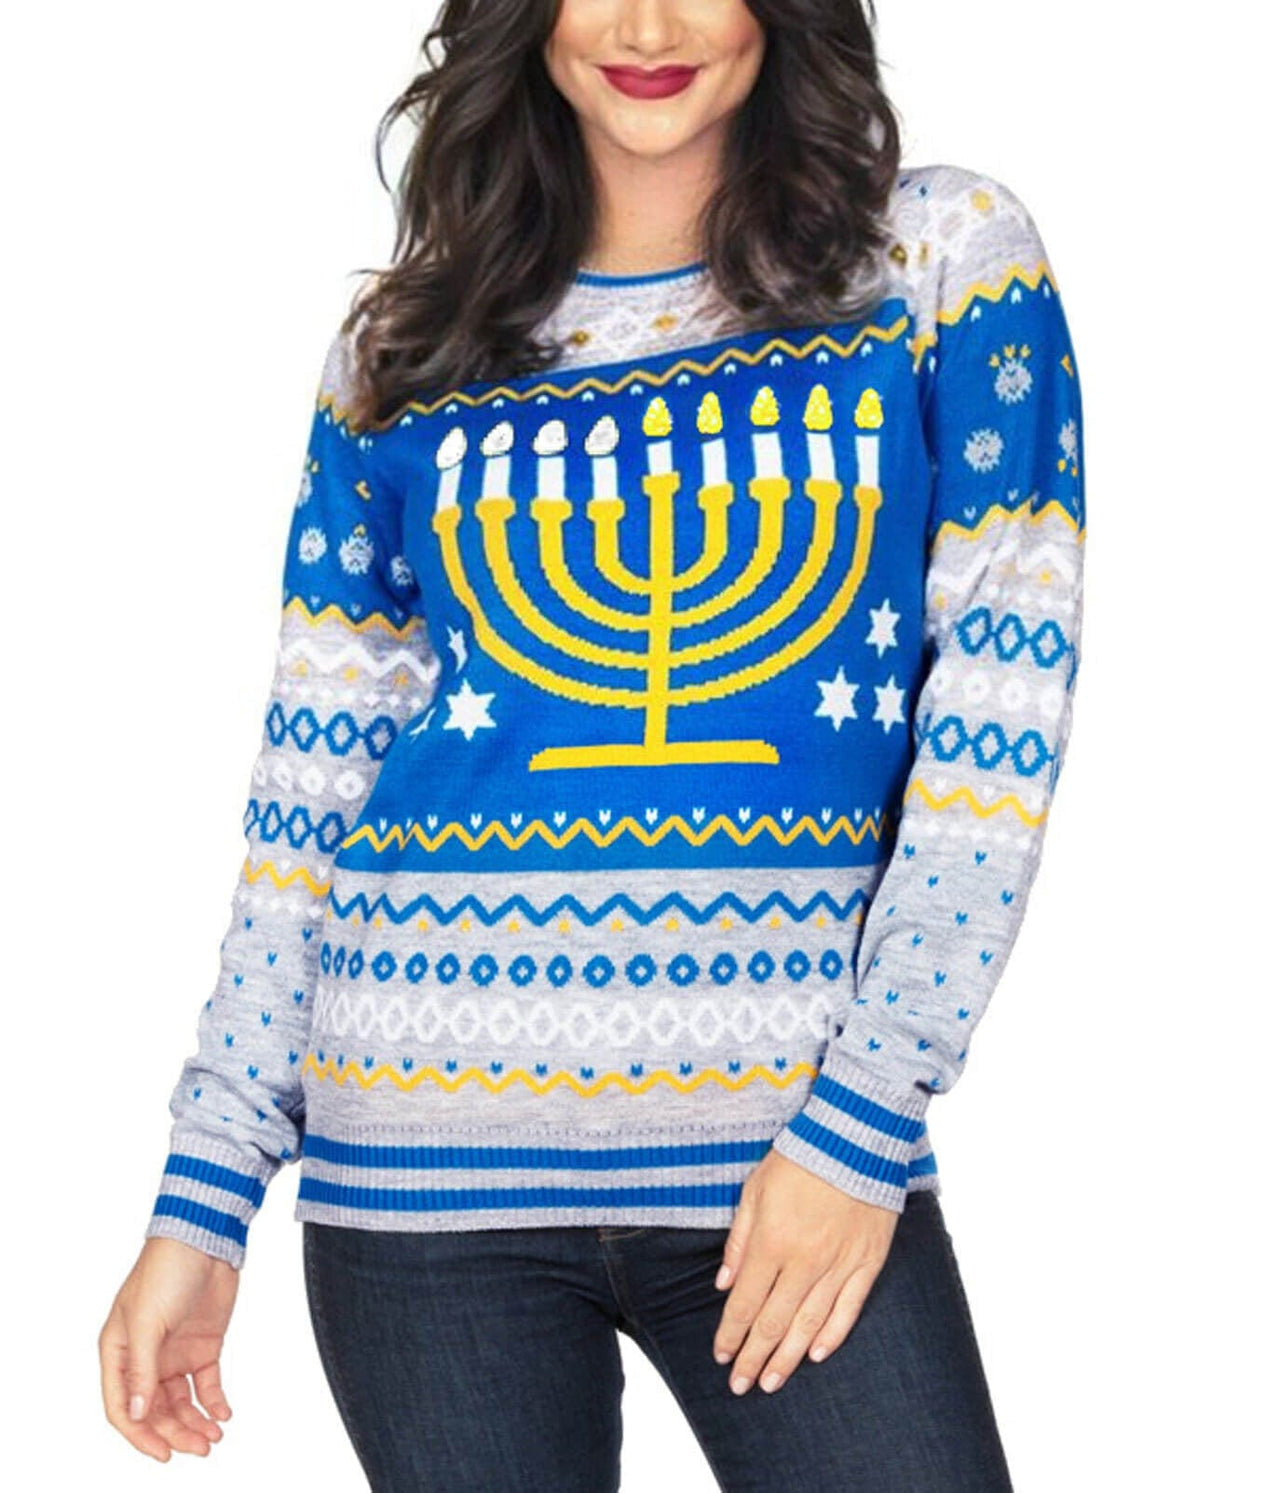 Tipsy Elves Sweaters Women's Reversible Menorah Sequin Sweater by Tipsy Elves (Sizes XS - 5XL)